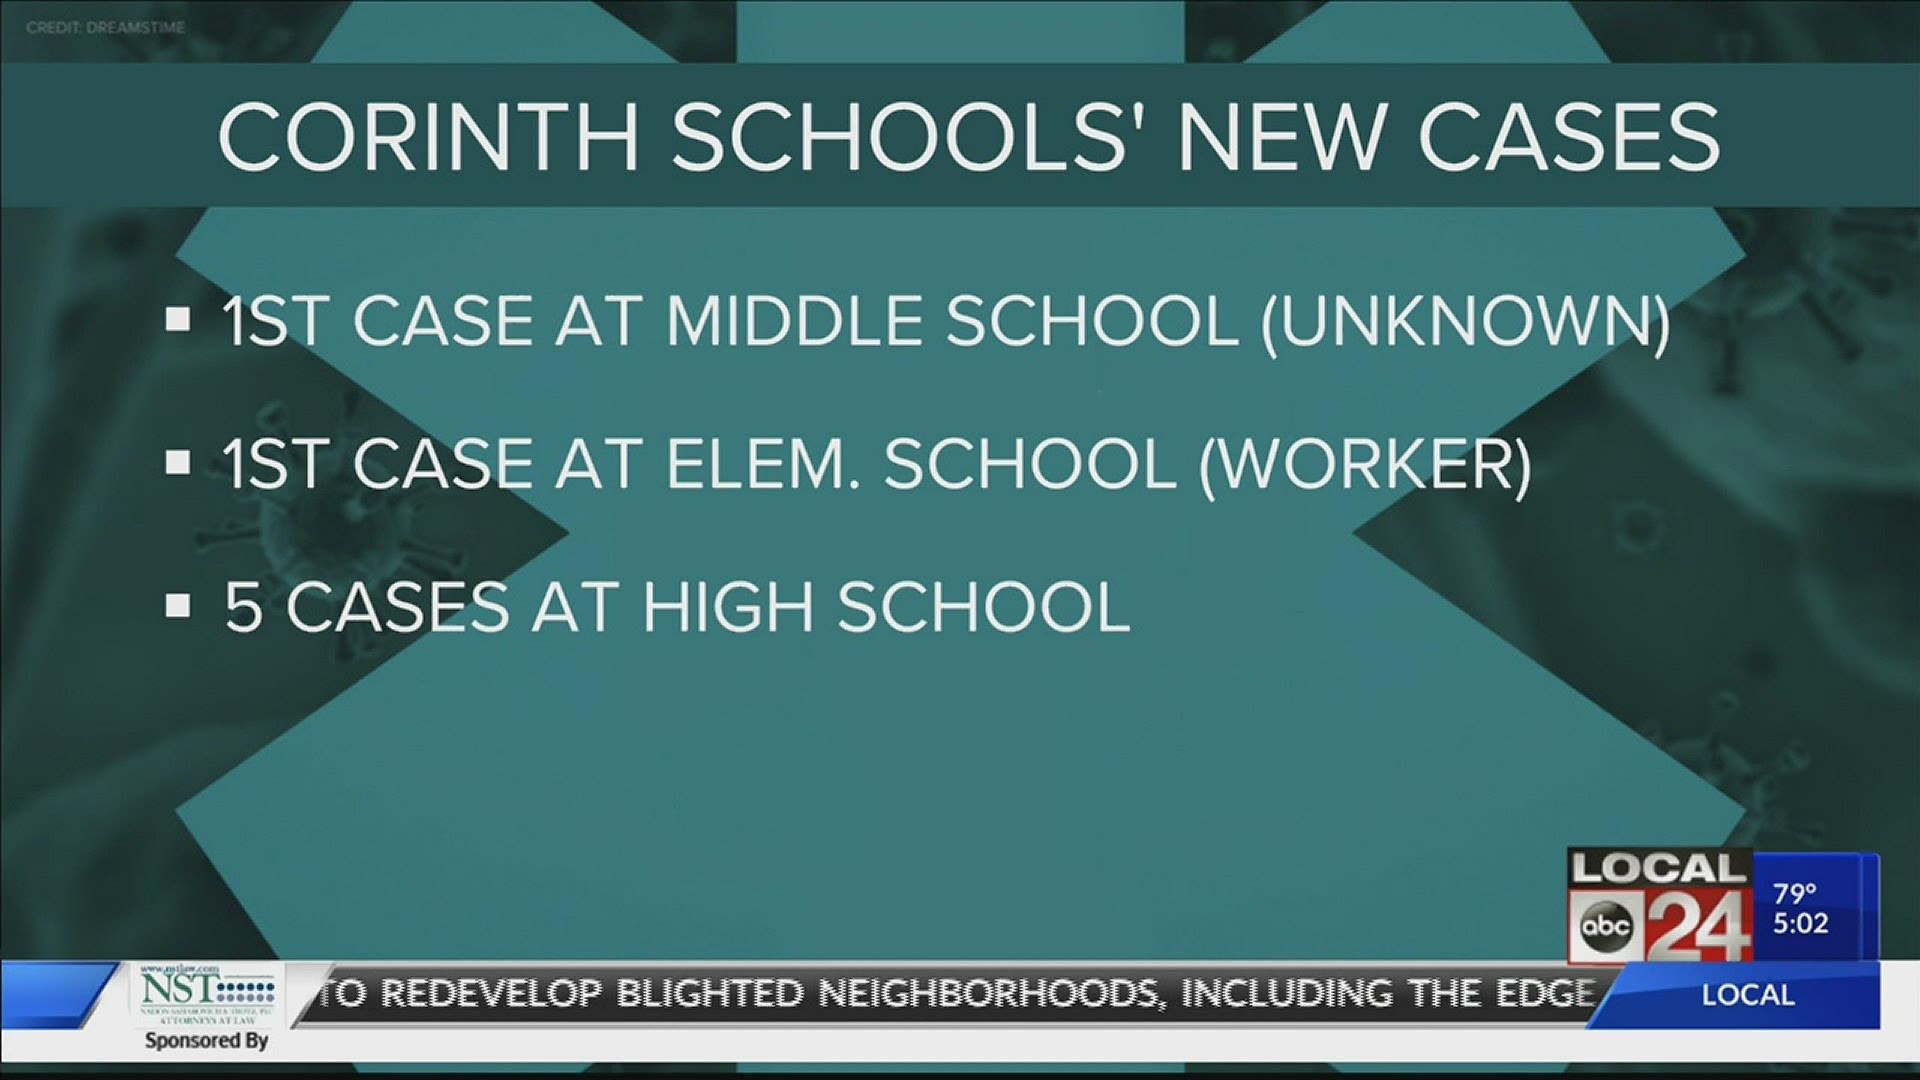 Two new cases were reported Wednesday by the Corinth School District, making a total of seven cases in the district.